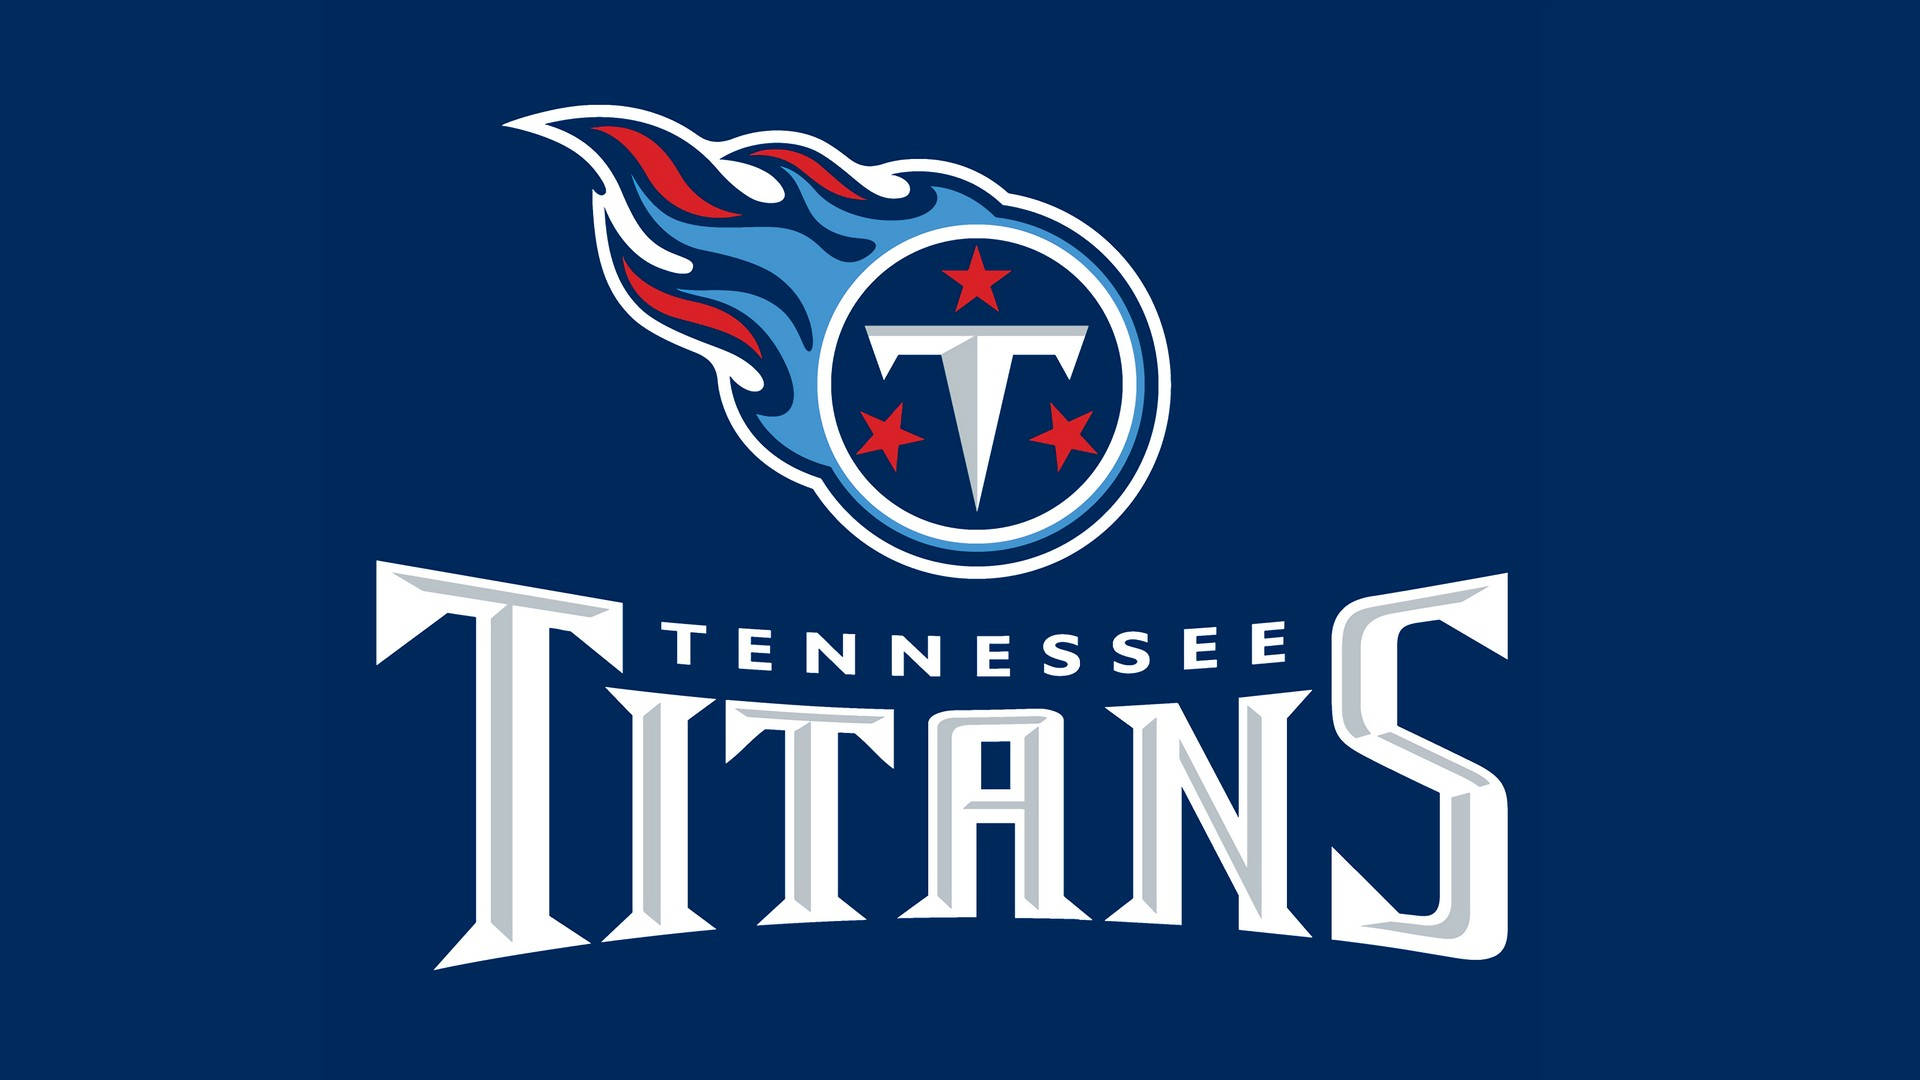 Tennessee Titans American Football Team Background